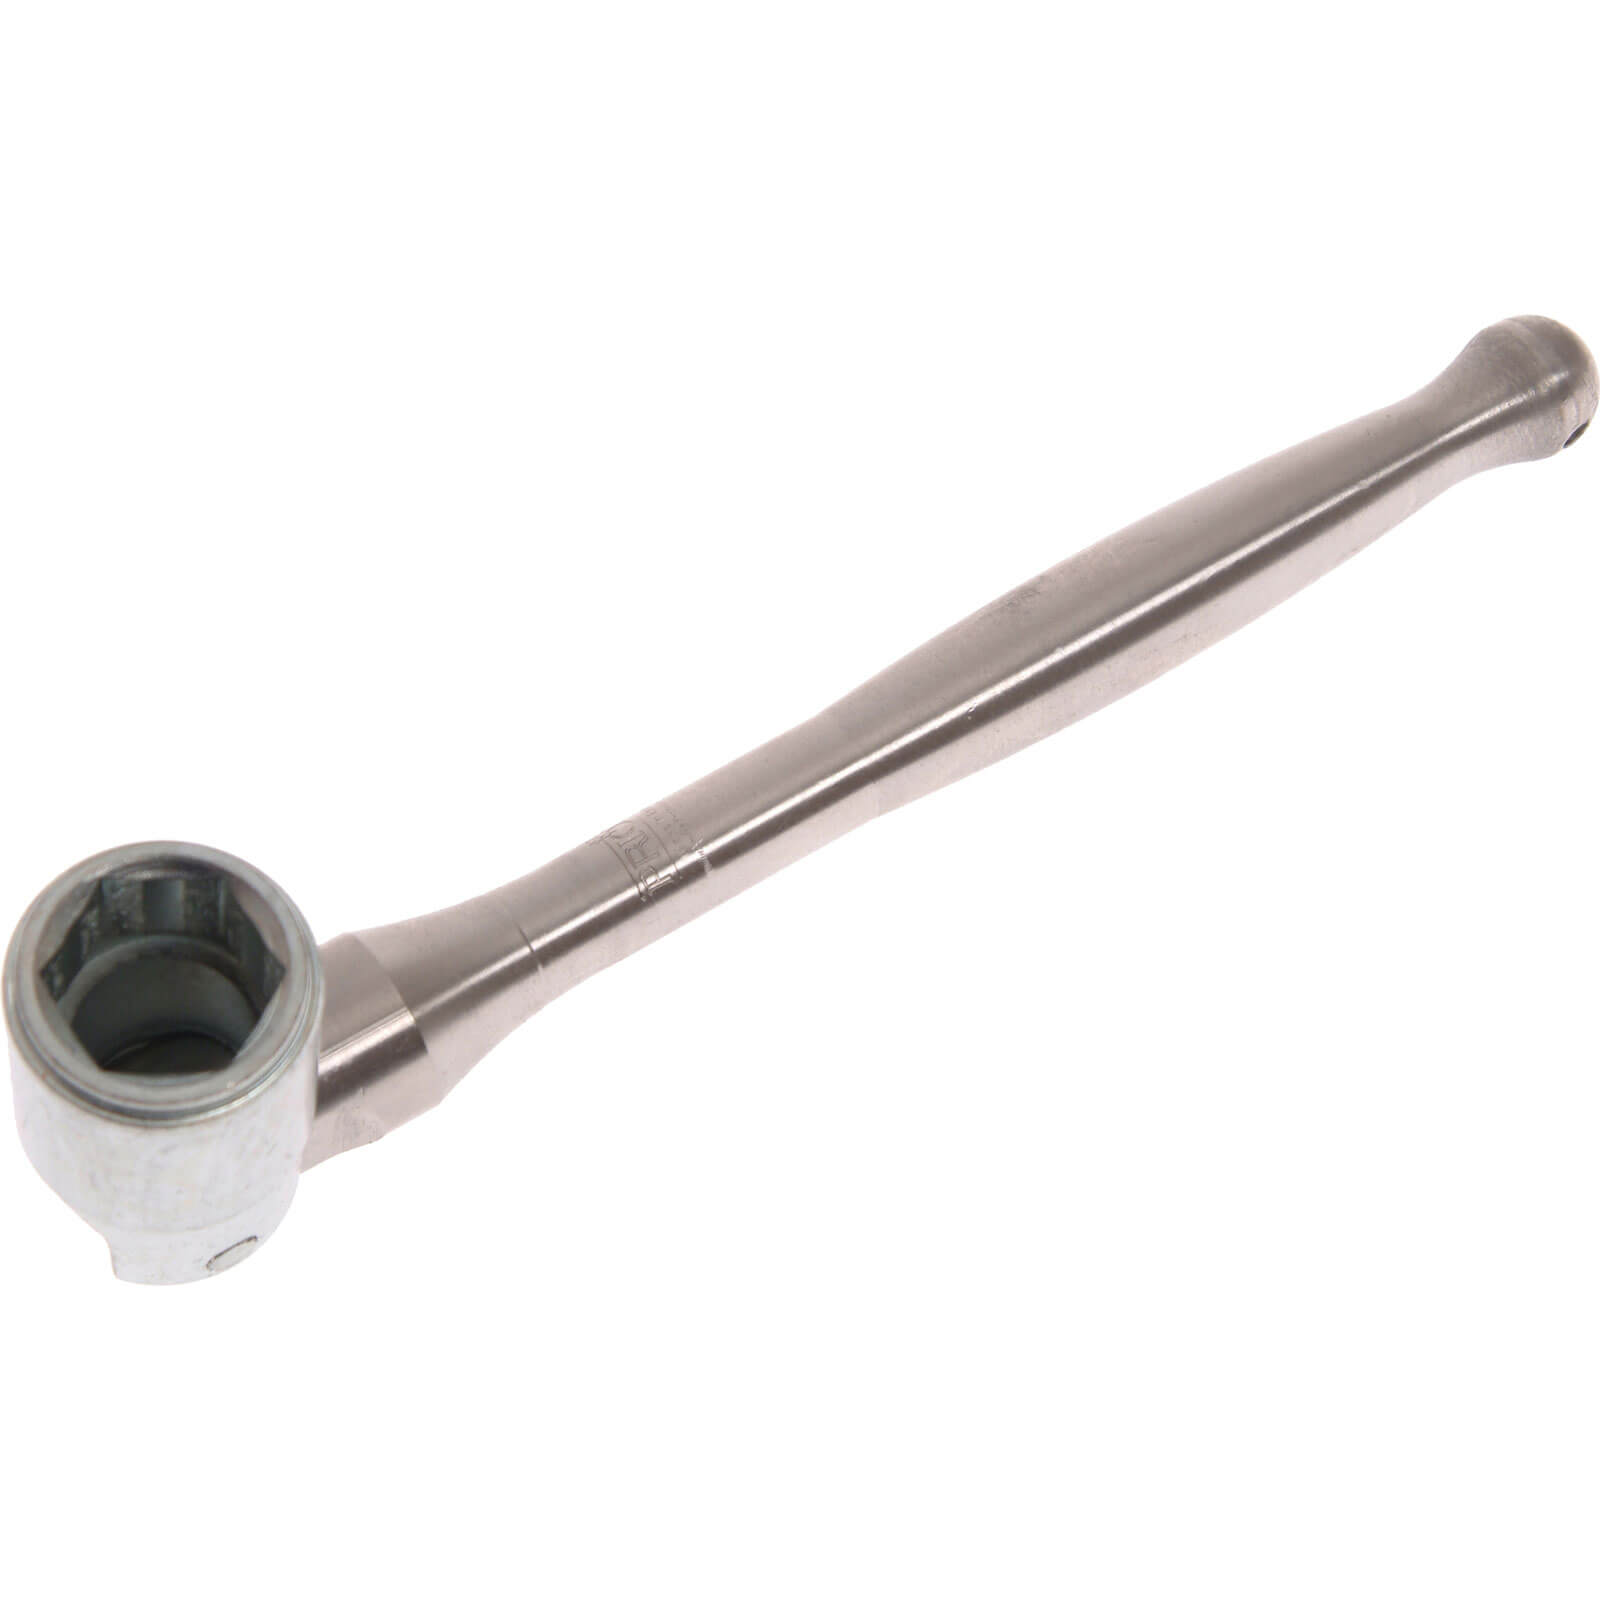 Priory 380 Stainless Steel Scaffold Spanner 1/2" Whitworth Poker